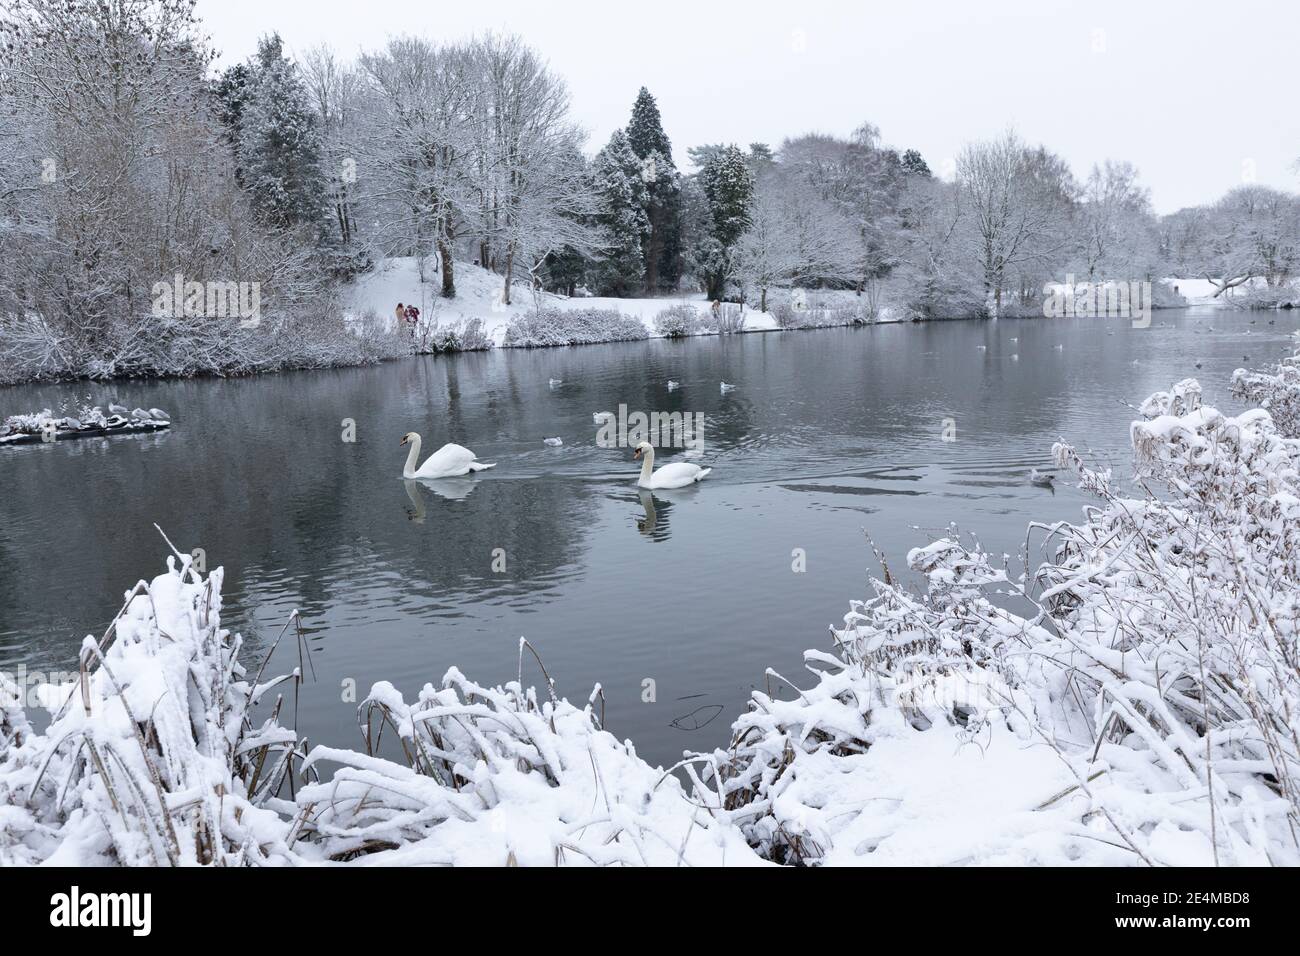 Cirencester Capital Of The Cotswolds In Roman Britain .First Snowfall In January 2021 Stock Photo